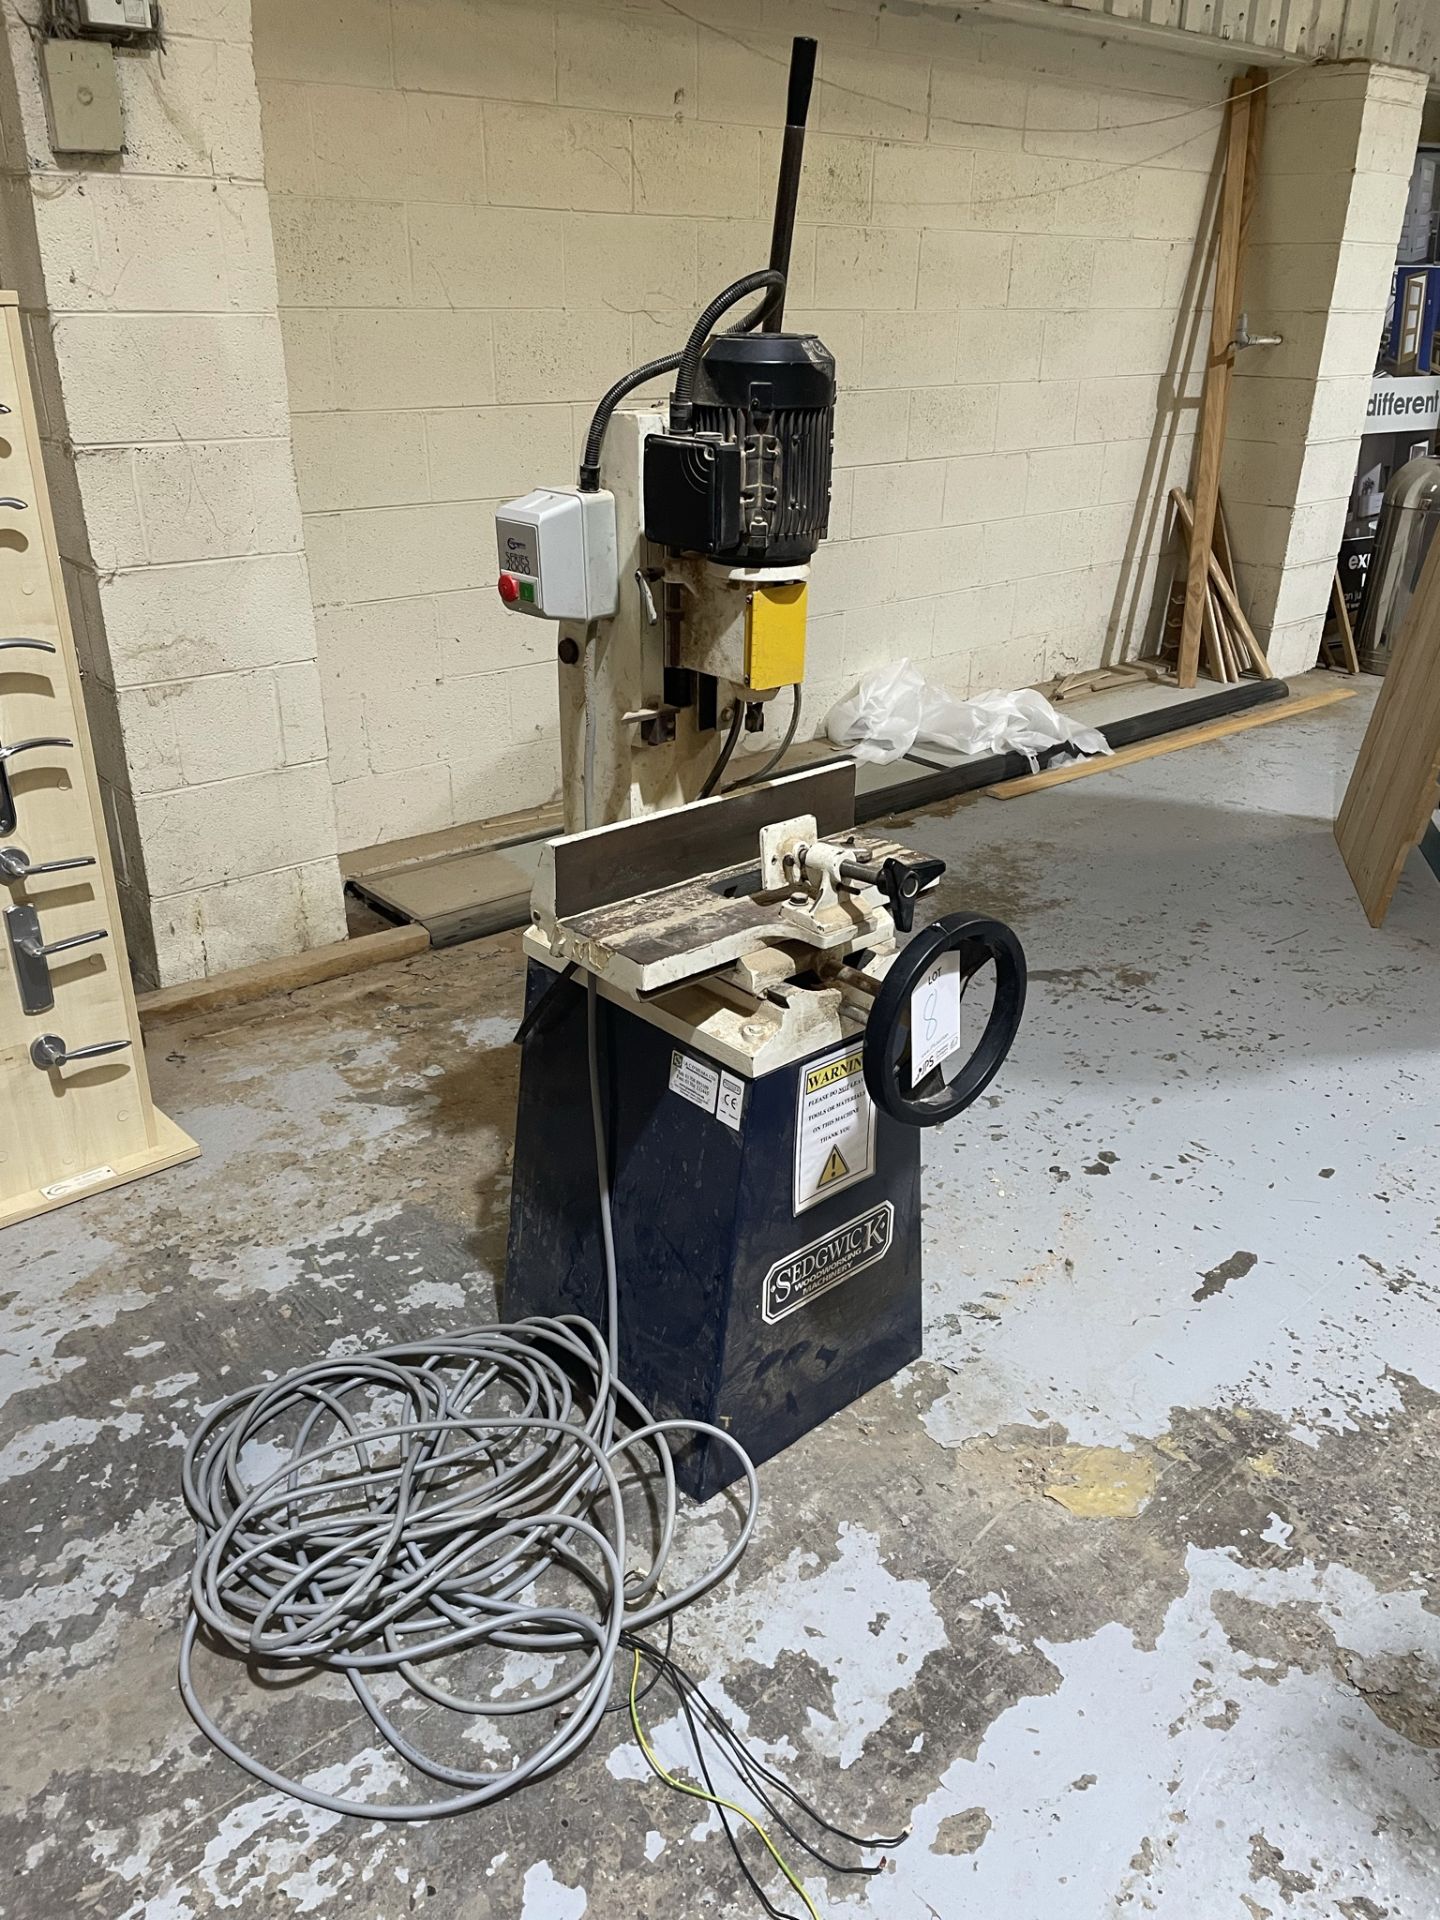 Sedgwick Heavy Duty Floor Standing Morticer | No Visible Model - Image 2 of 5